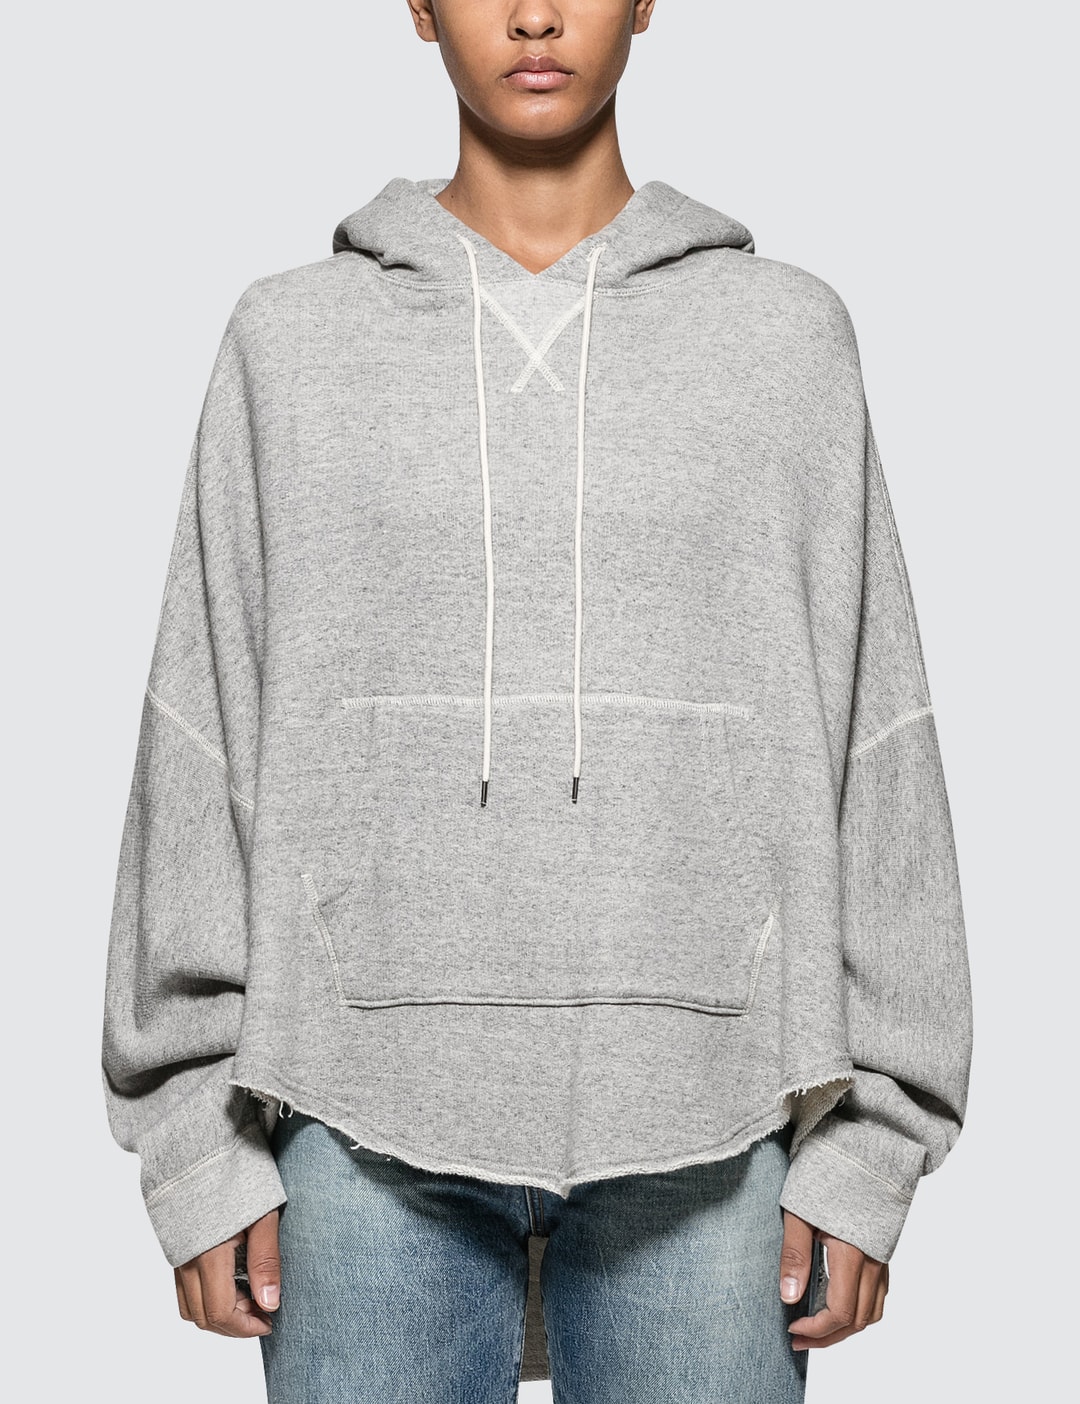 R13 - Patti Hoodie | HBX - Globally Curated Fashion and Lifestyle by ...